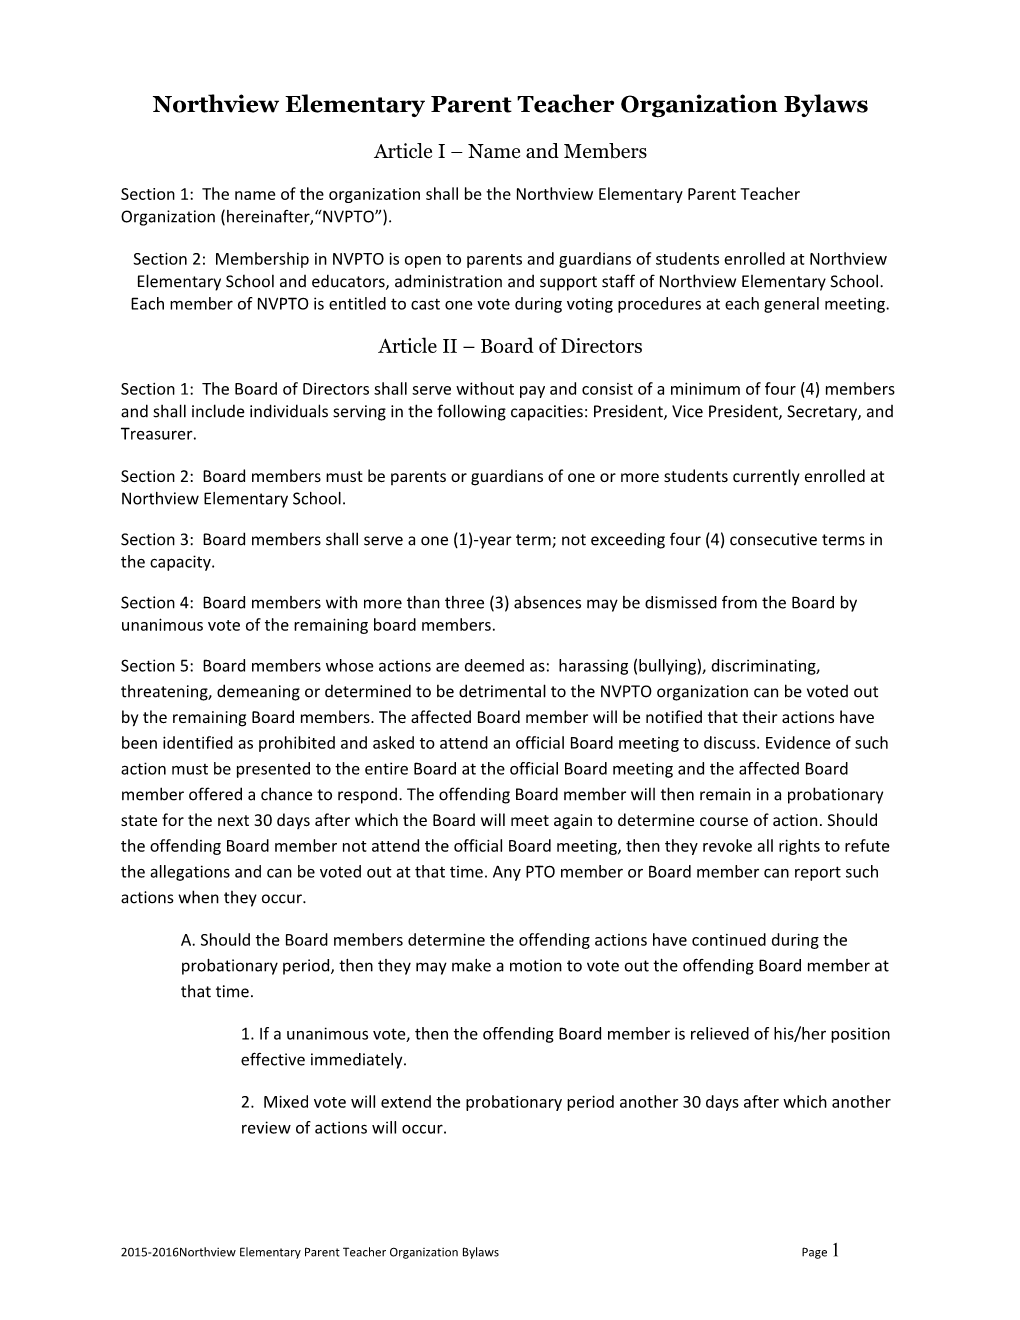 Constitution and Bylaws of the Northview Elementary Parent Teacher Organization (NVPTO)